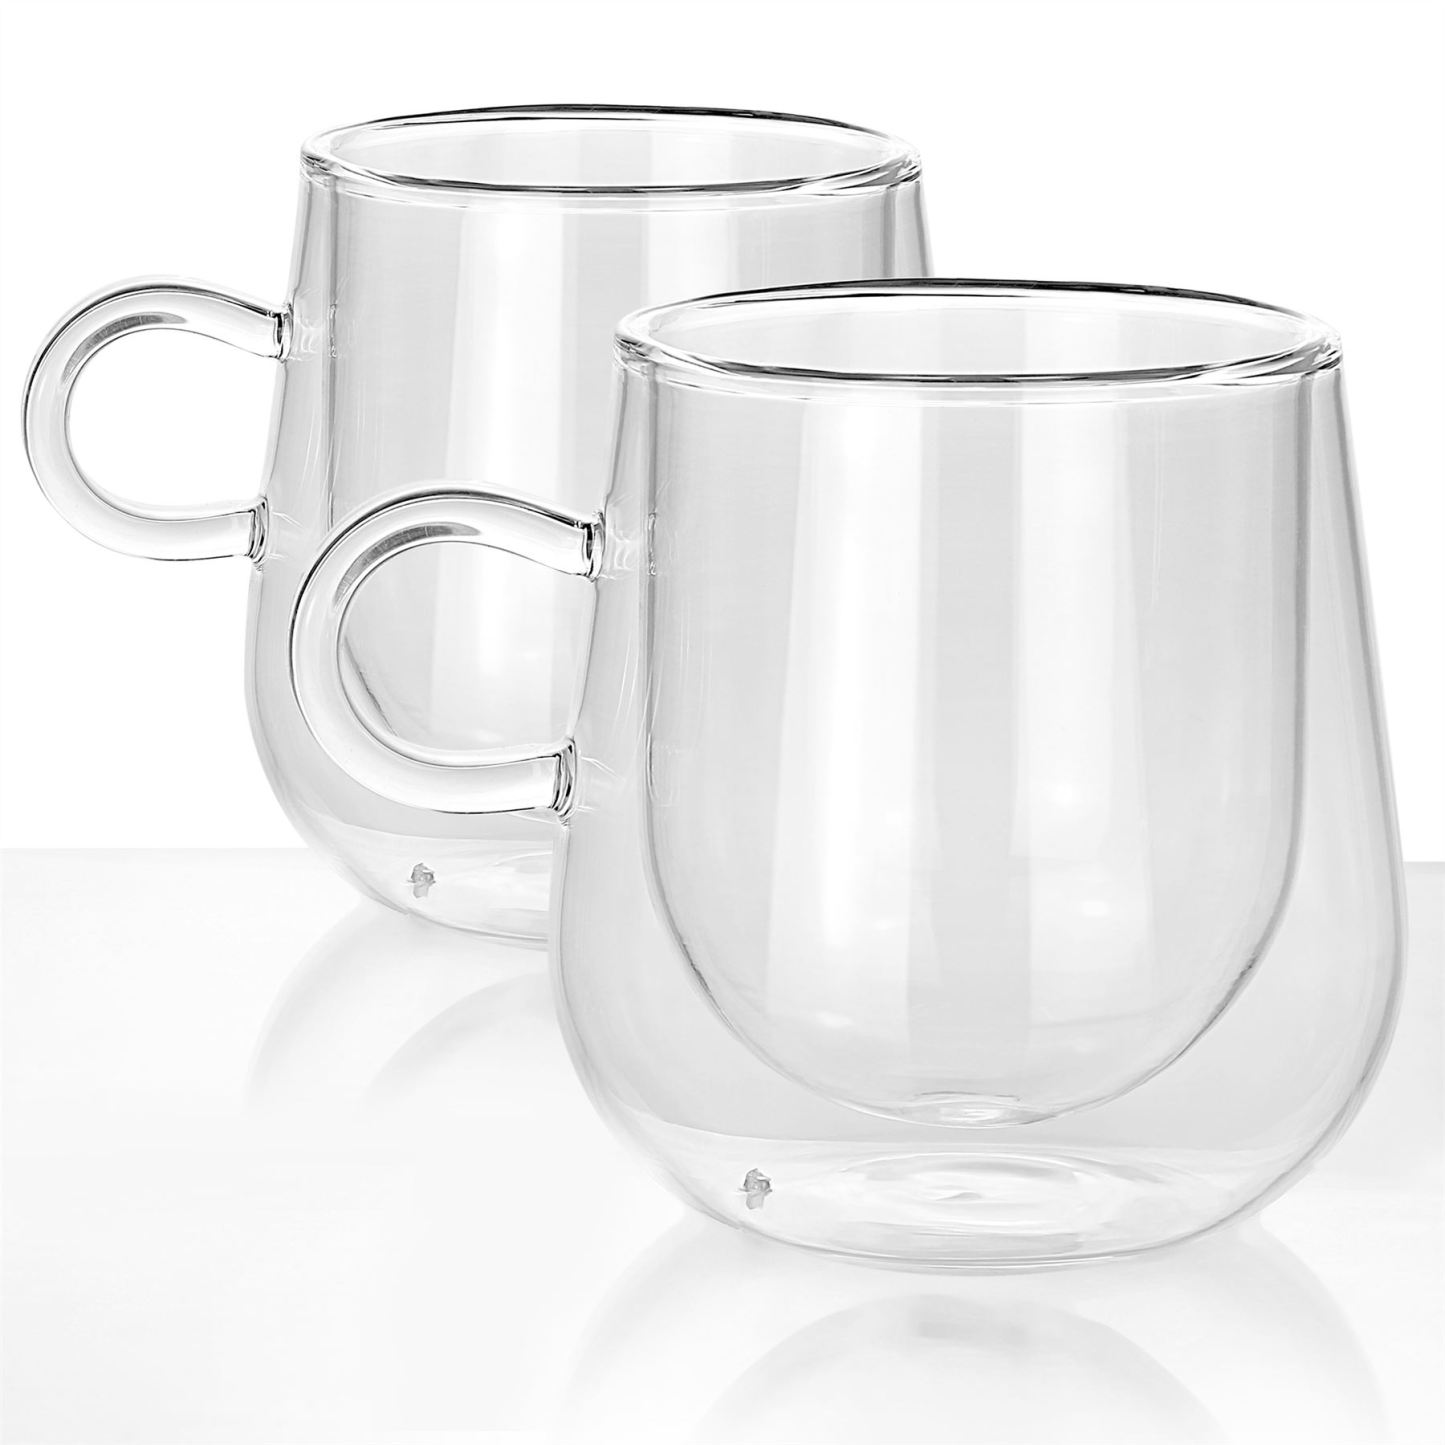 Double Walled 275ml Coffee Glasses with Handles - Set of 2 | M&W